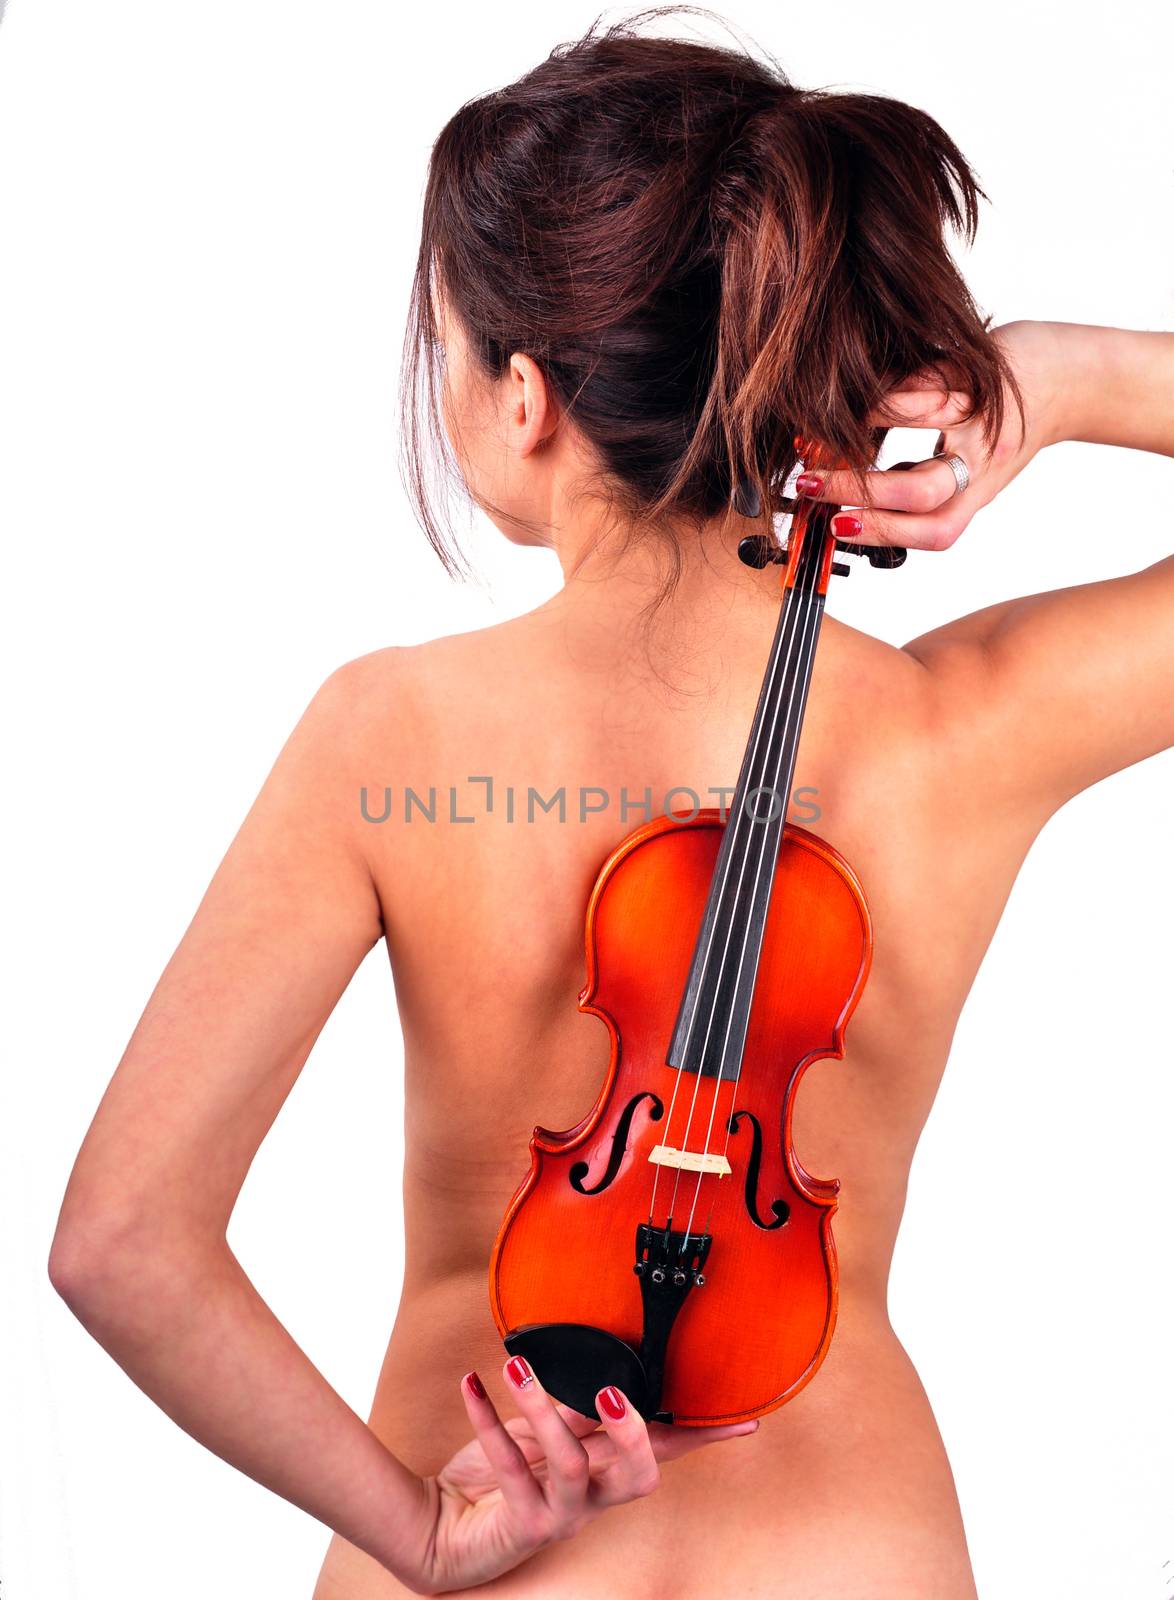 violin on the naked back of a young girl by Nikola30